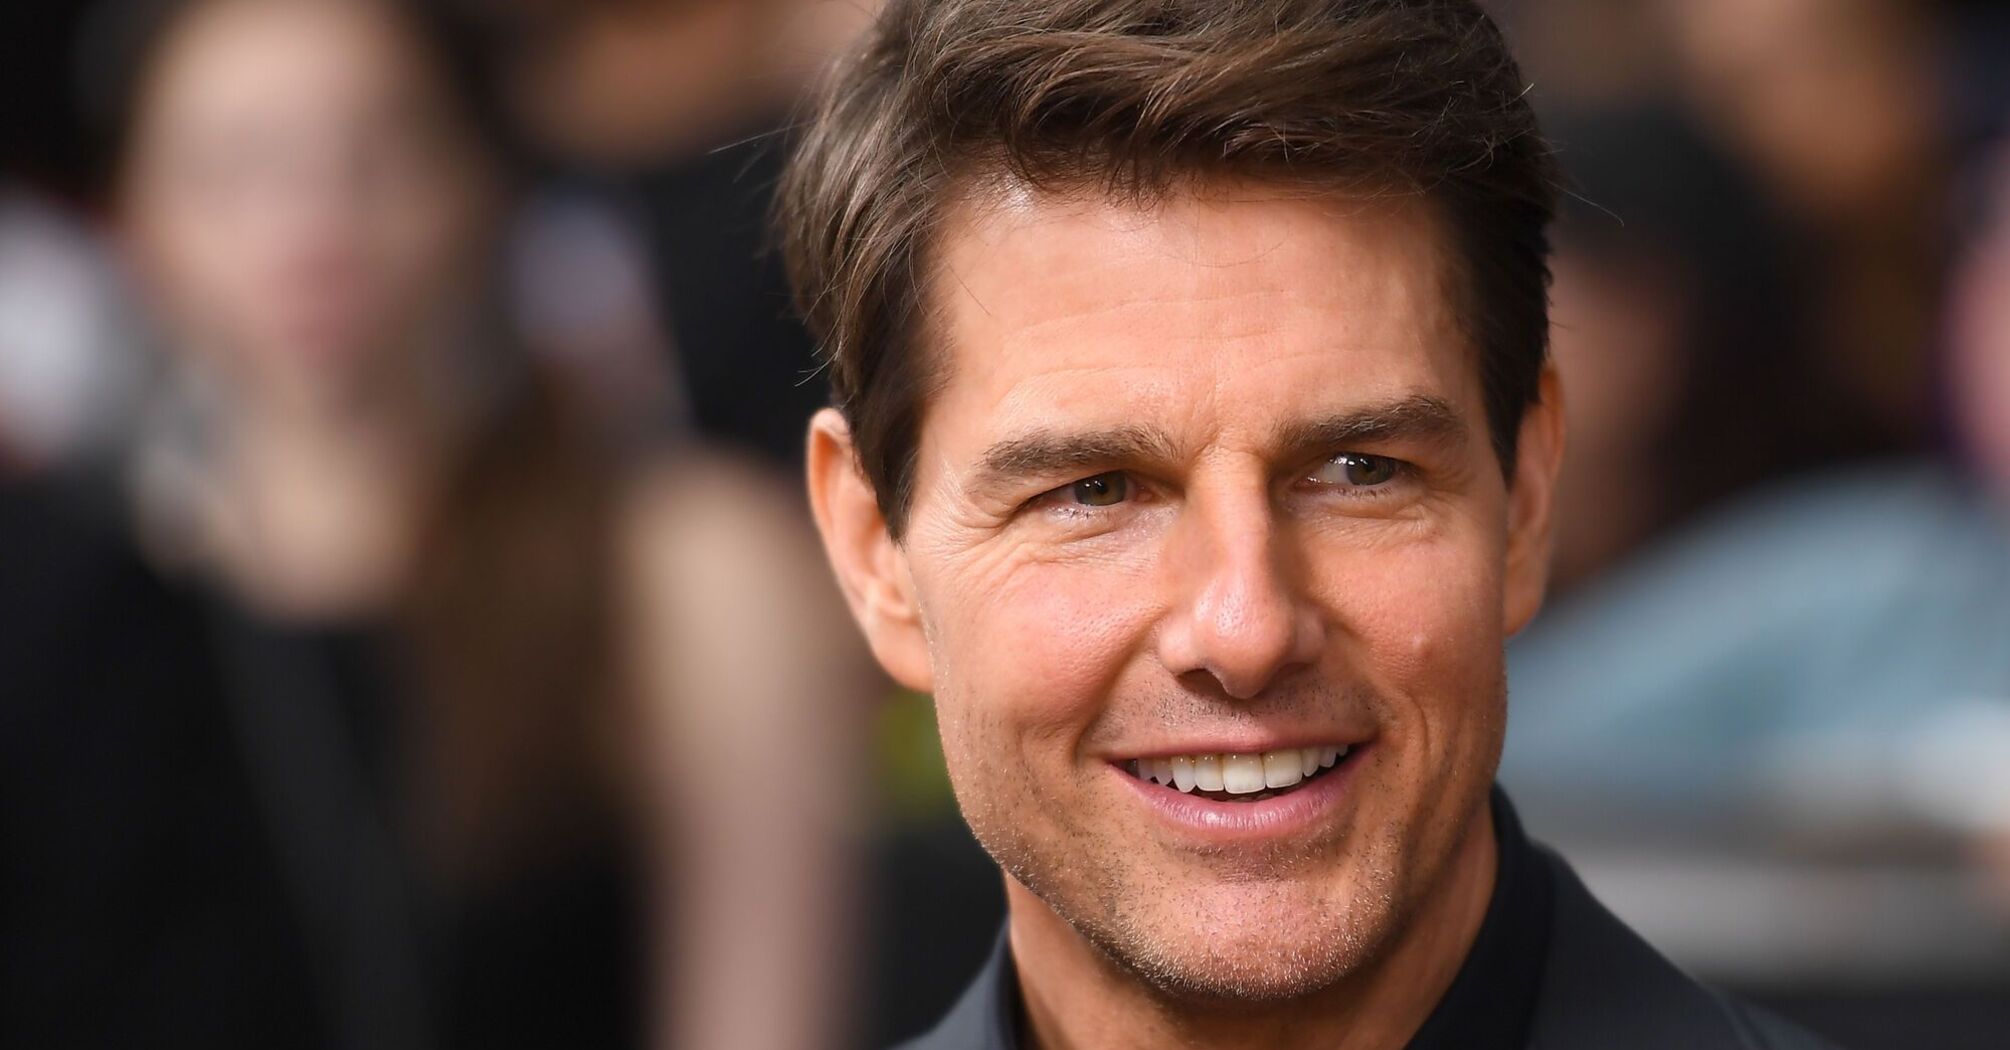 Mission Impossible 7 premiere took place in Rome